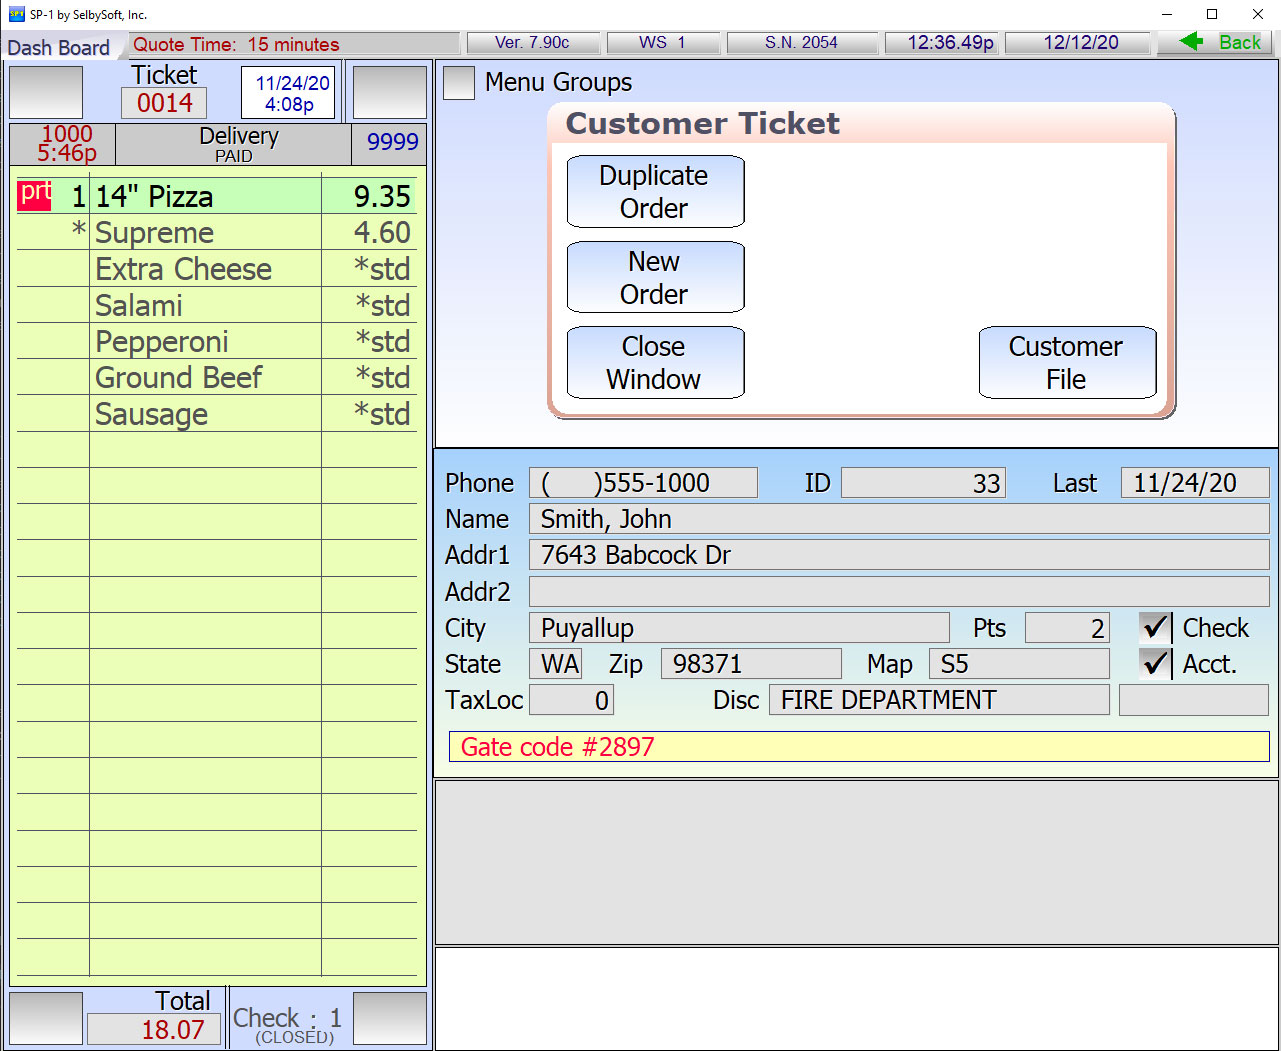 Customer screen with Pizza on ticket 